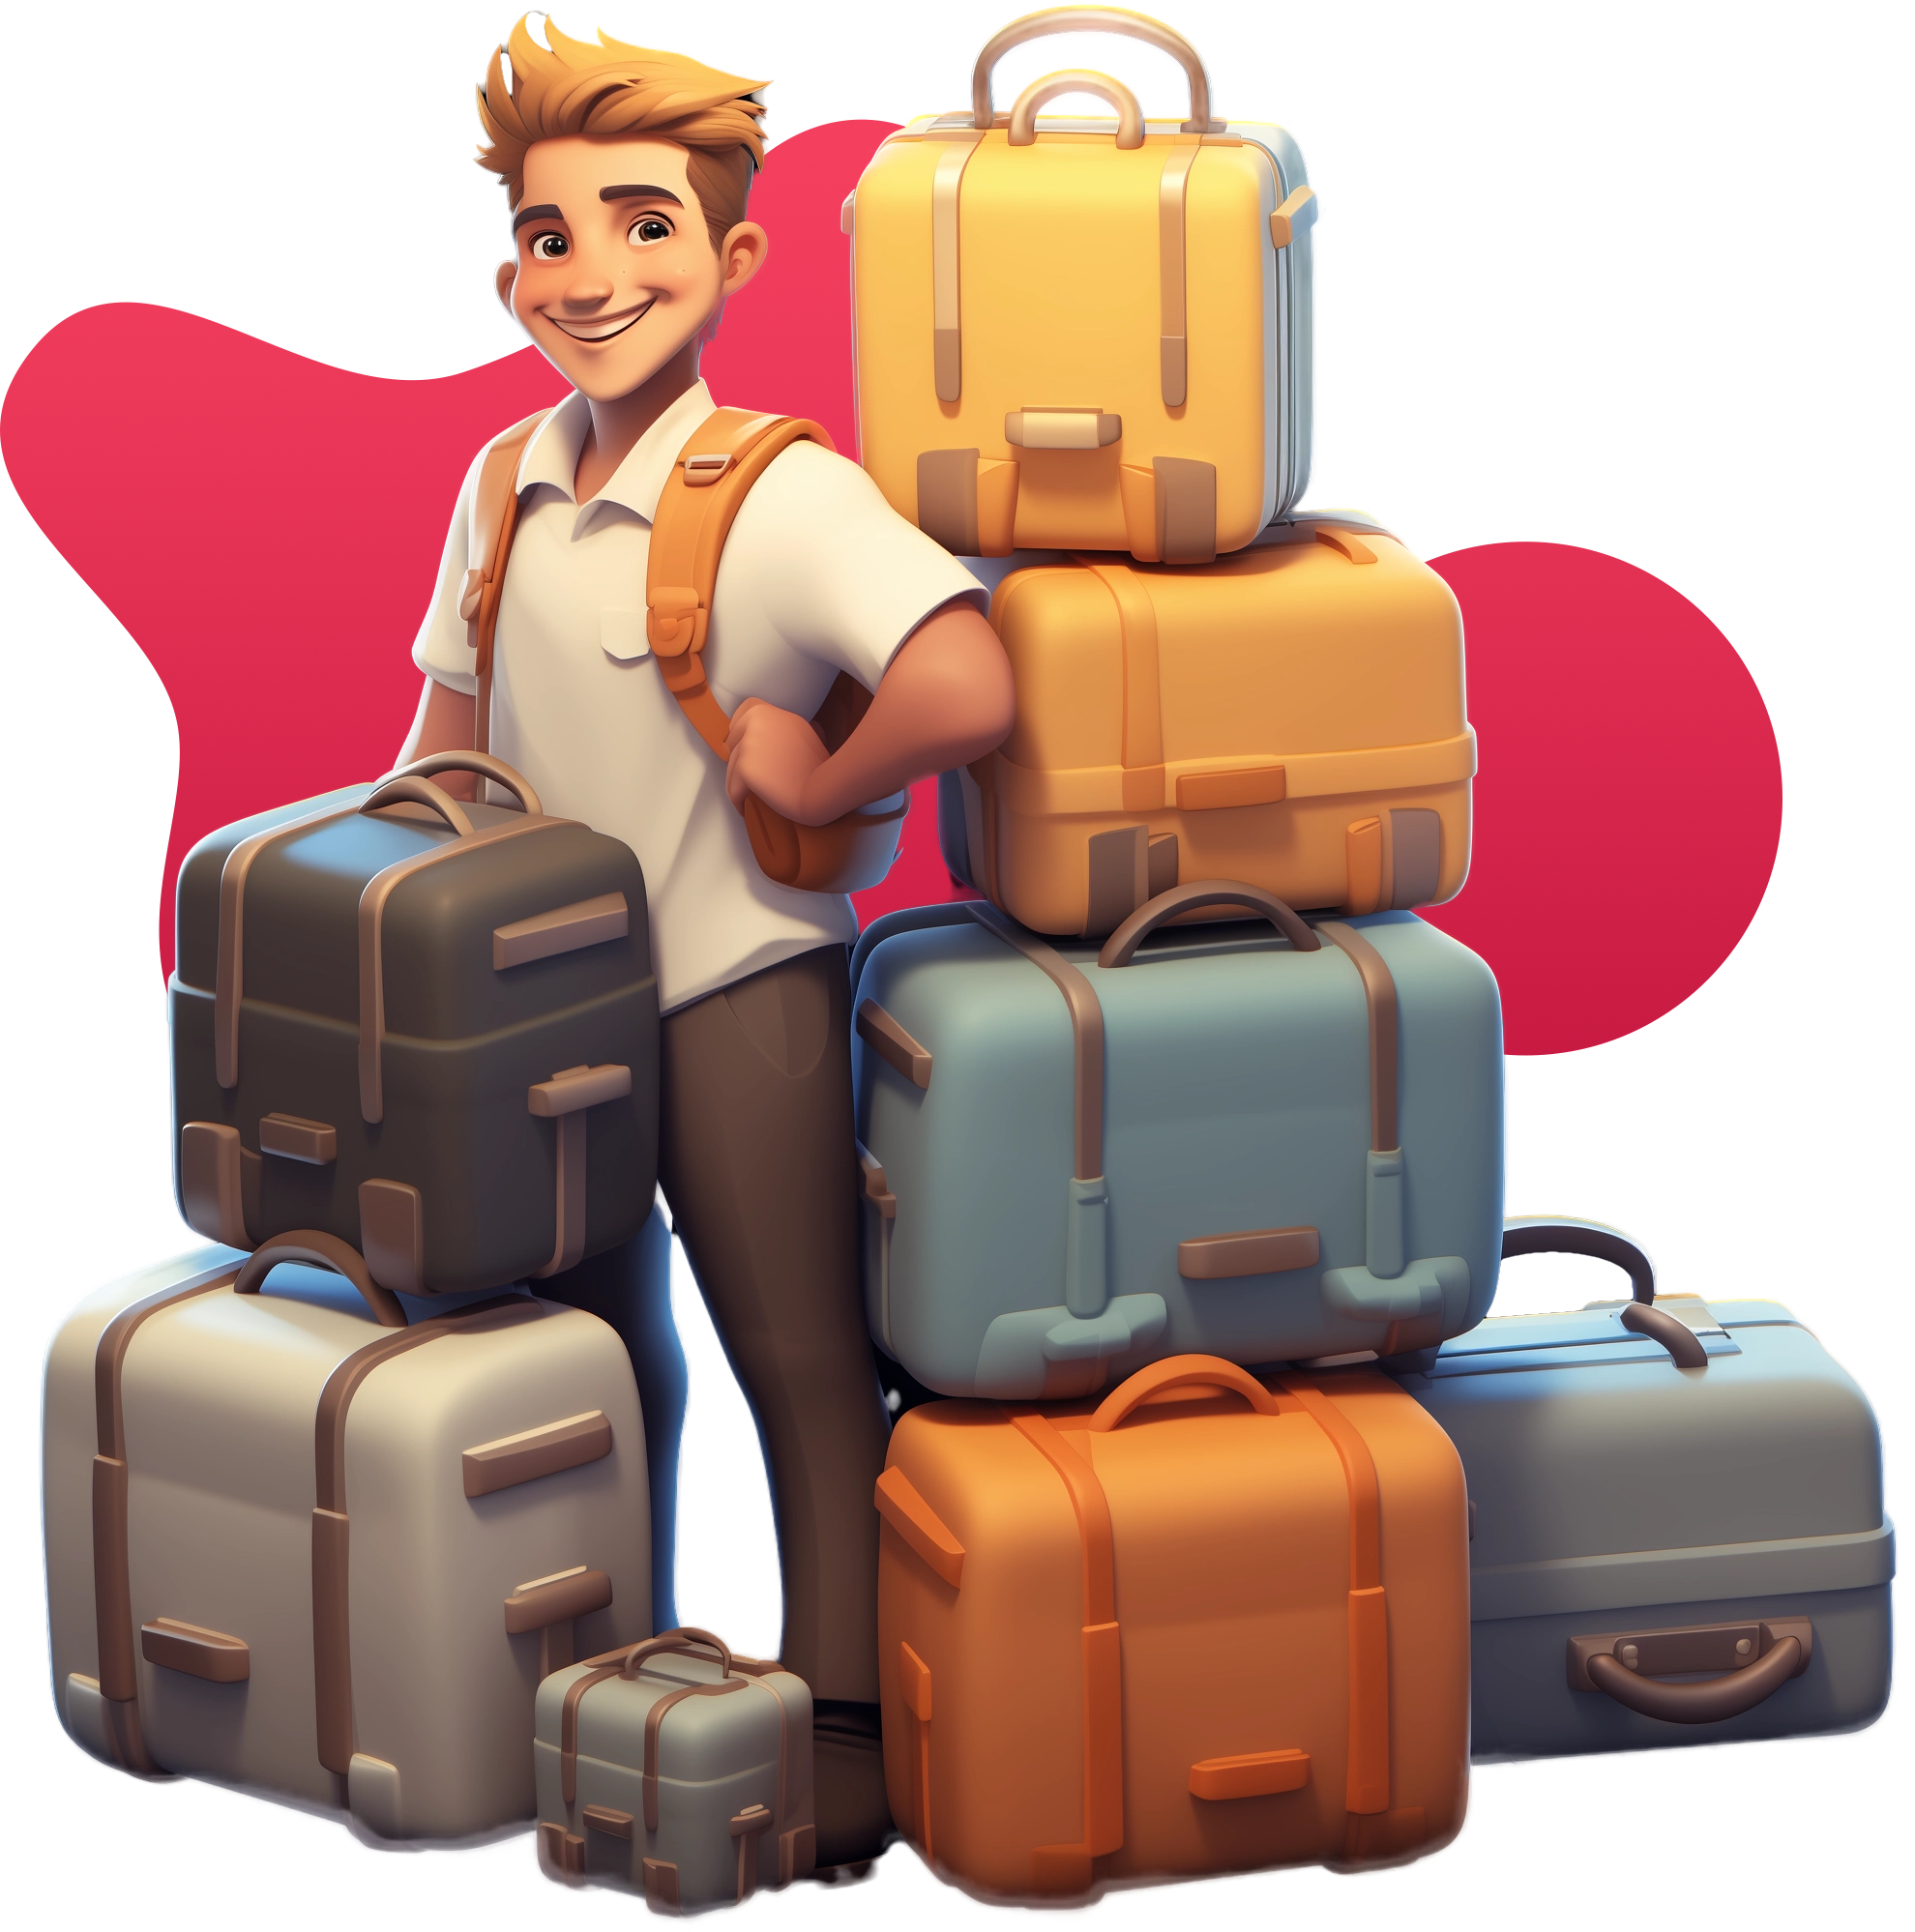 A young man with a pile of suitcases, bags and backpacks, smiling because he knows he has Sherpo to help him.